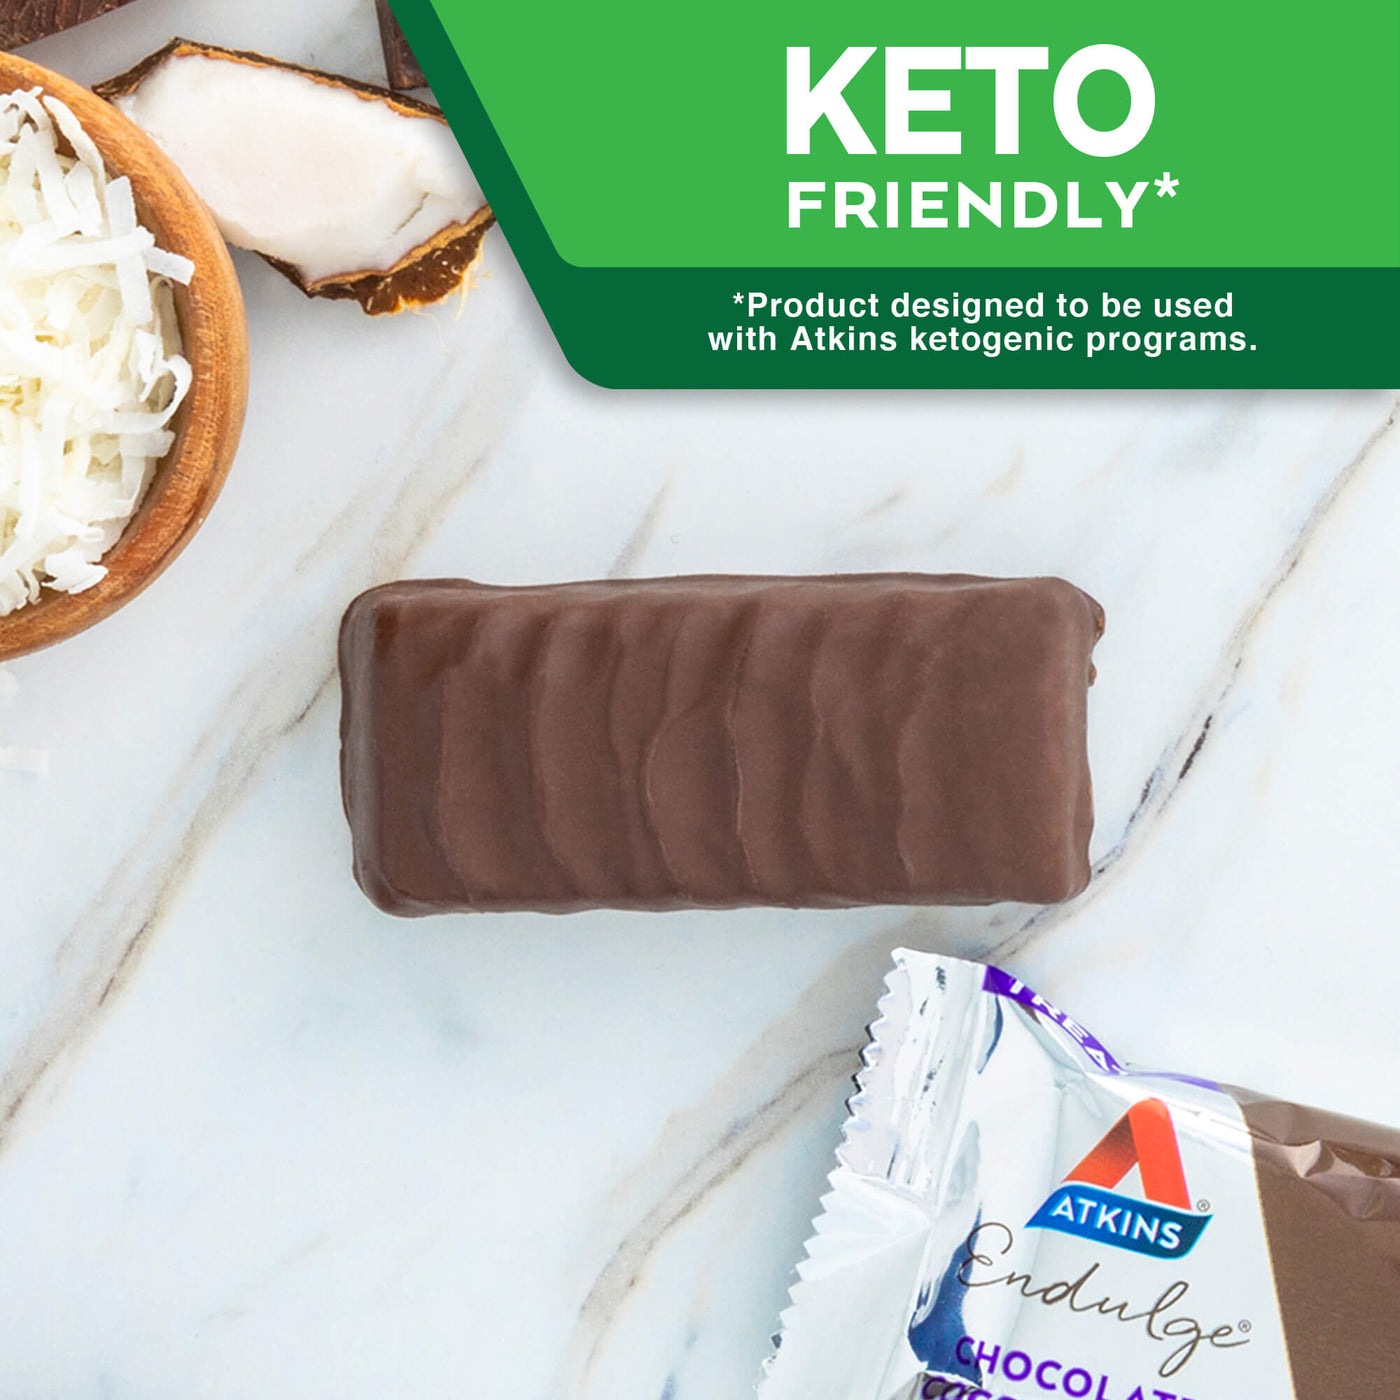 Endulge Chocolate Coconut Bar. Keto the Atkins Way* *Product designed to be used with Atkins ketogenic programs.